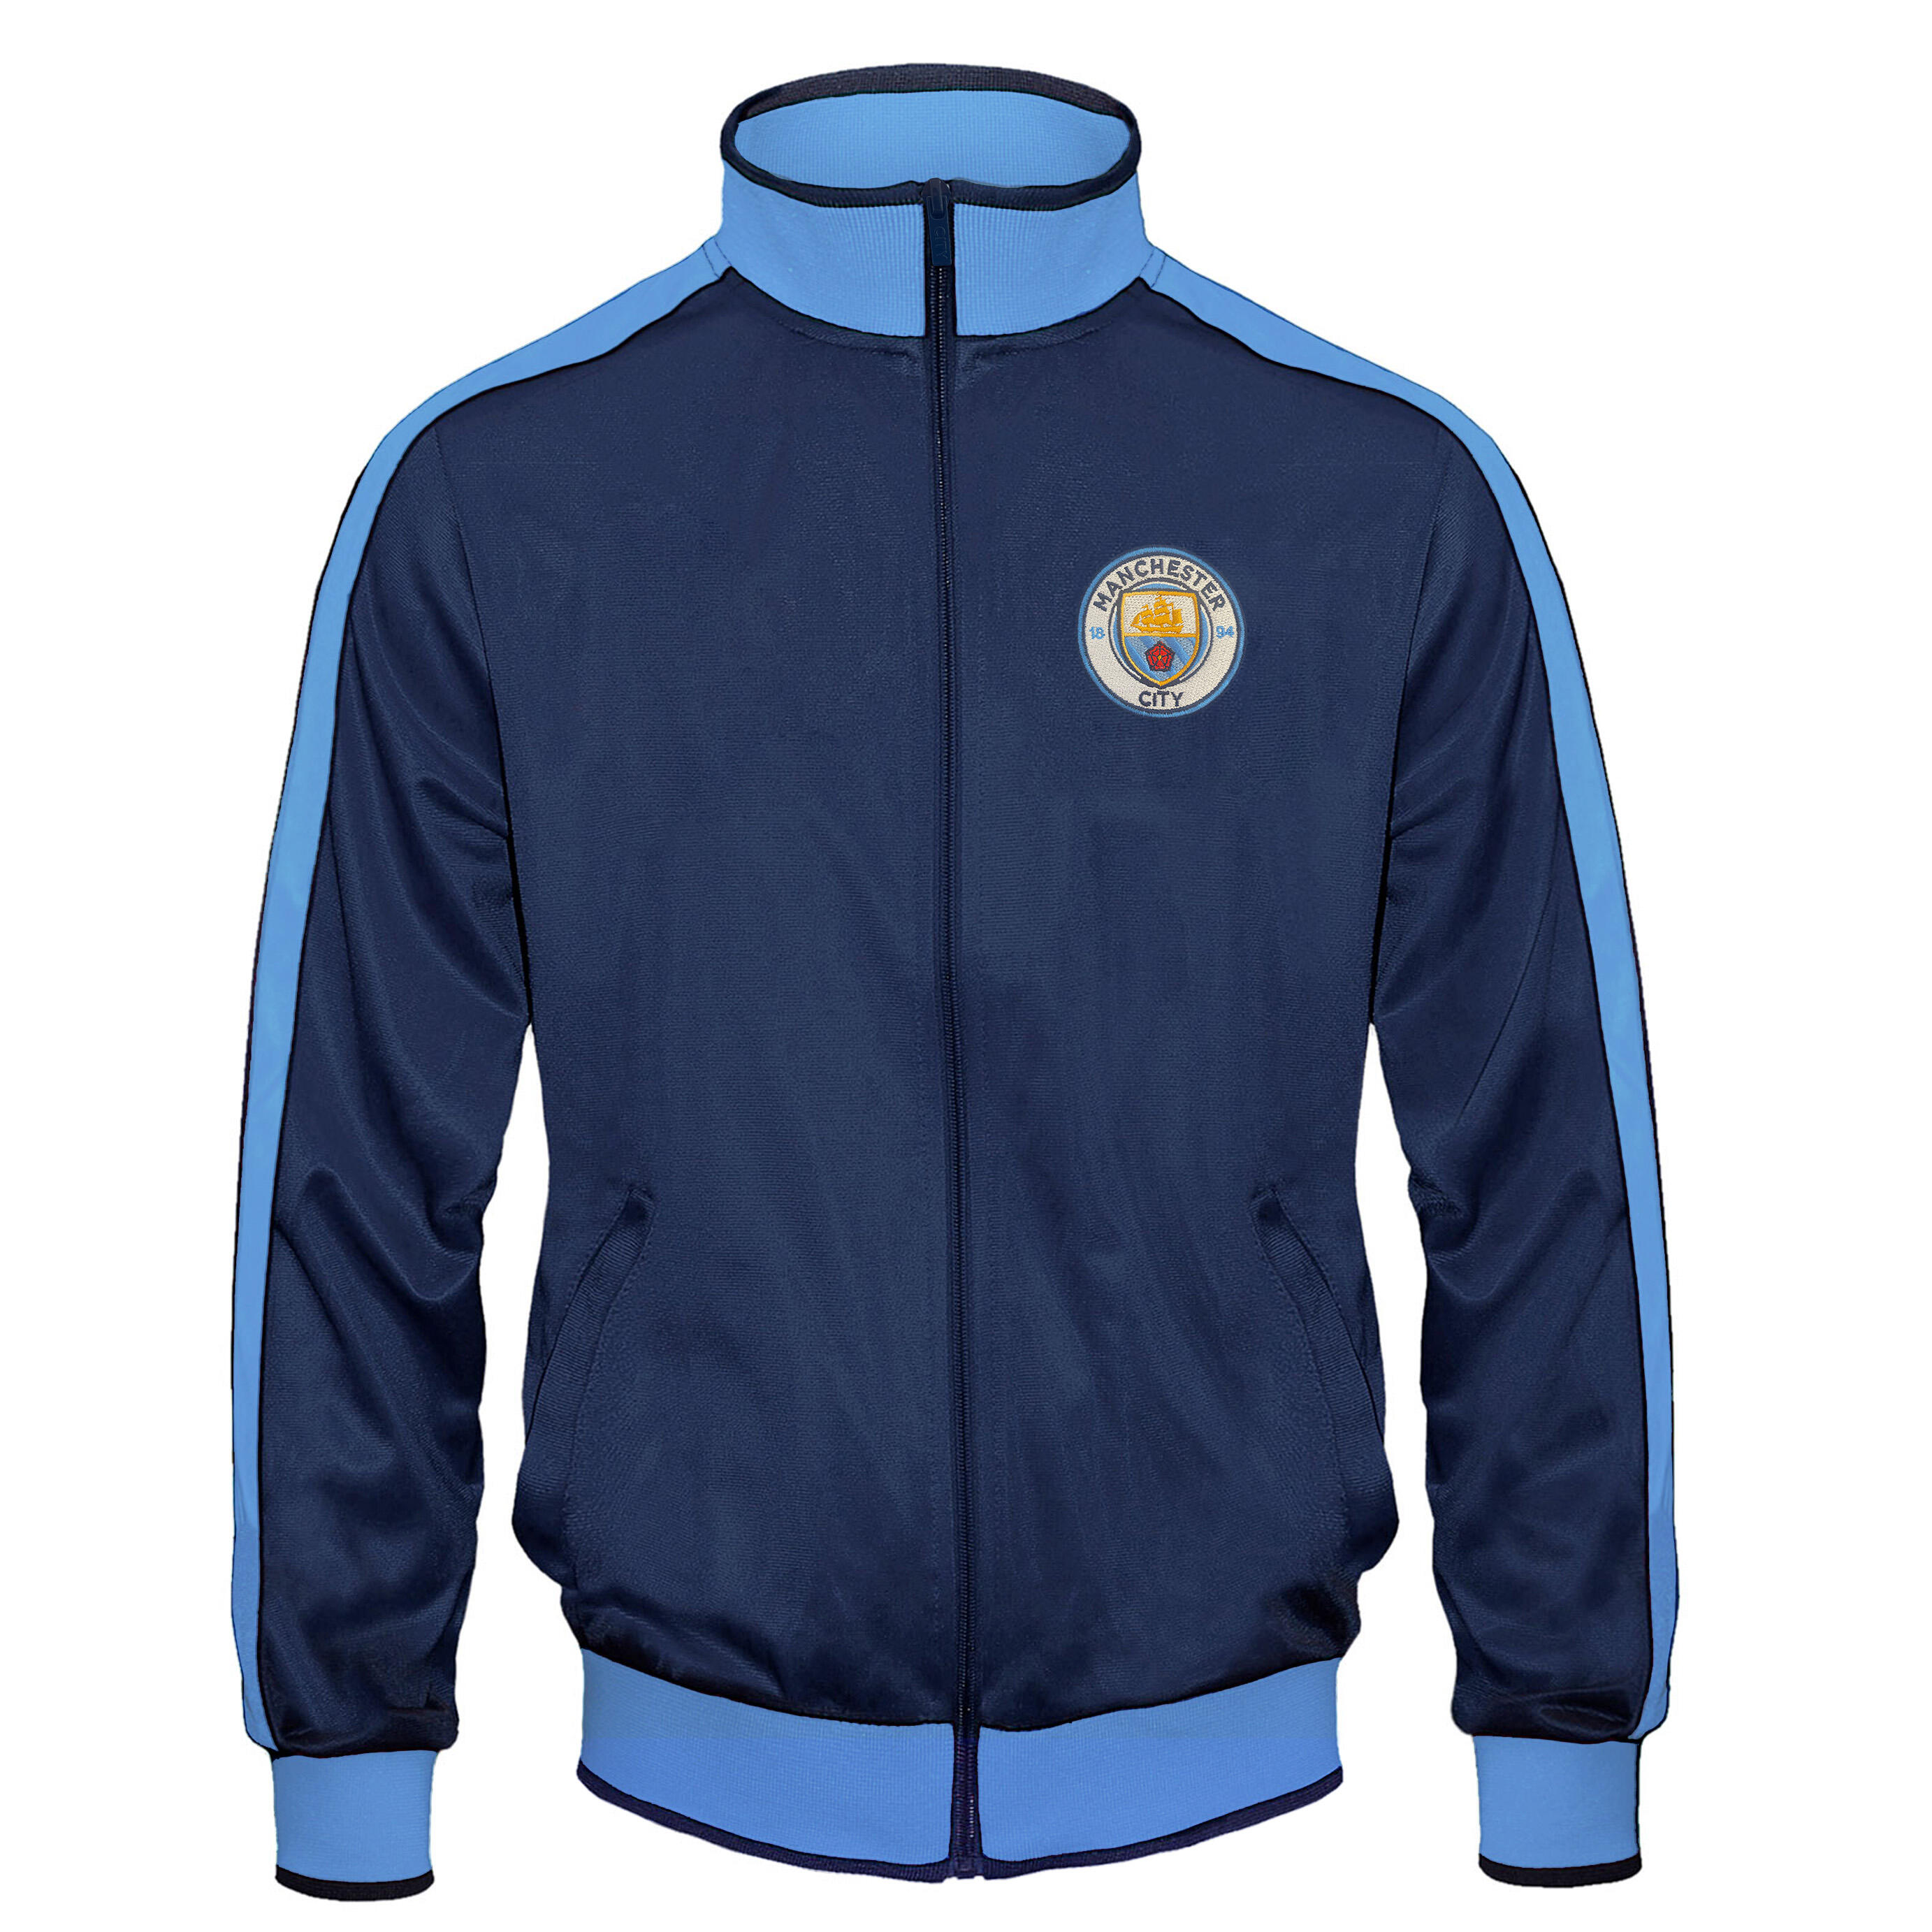 MANCHESTER CITY Manchester City Boys Jacket Track Top Retro Kids OFFICIAL Football Gift